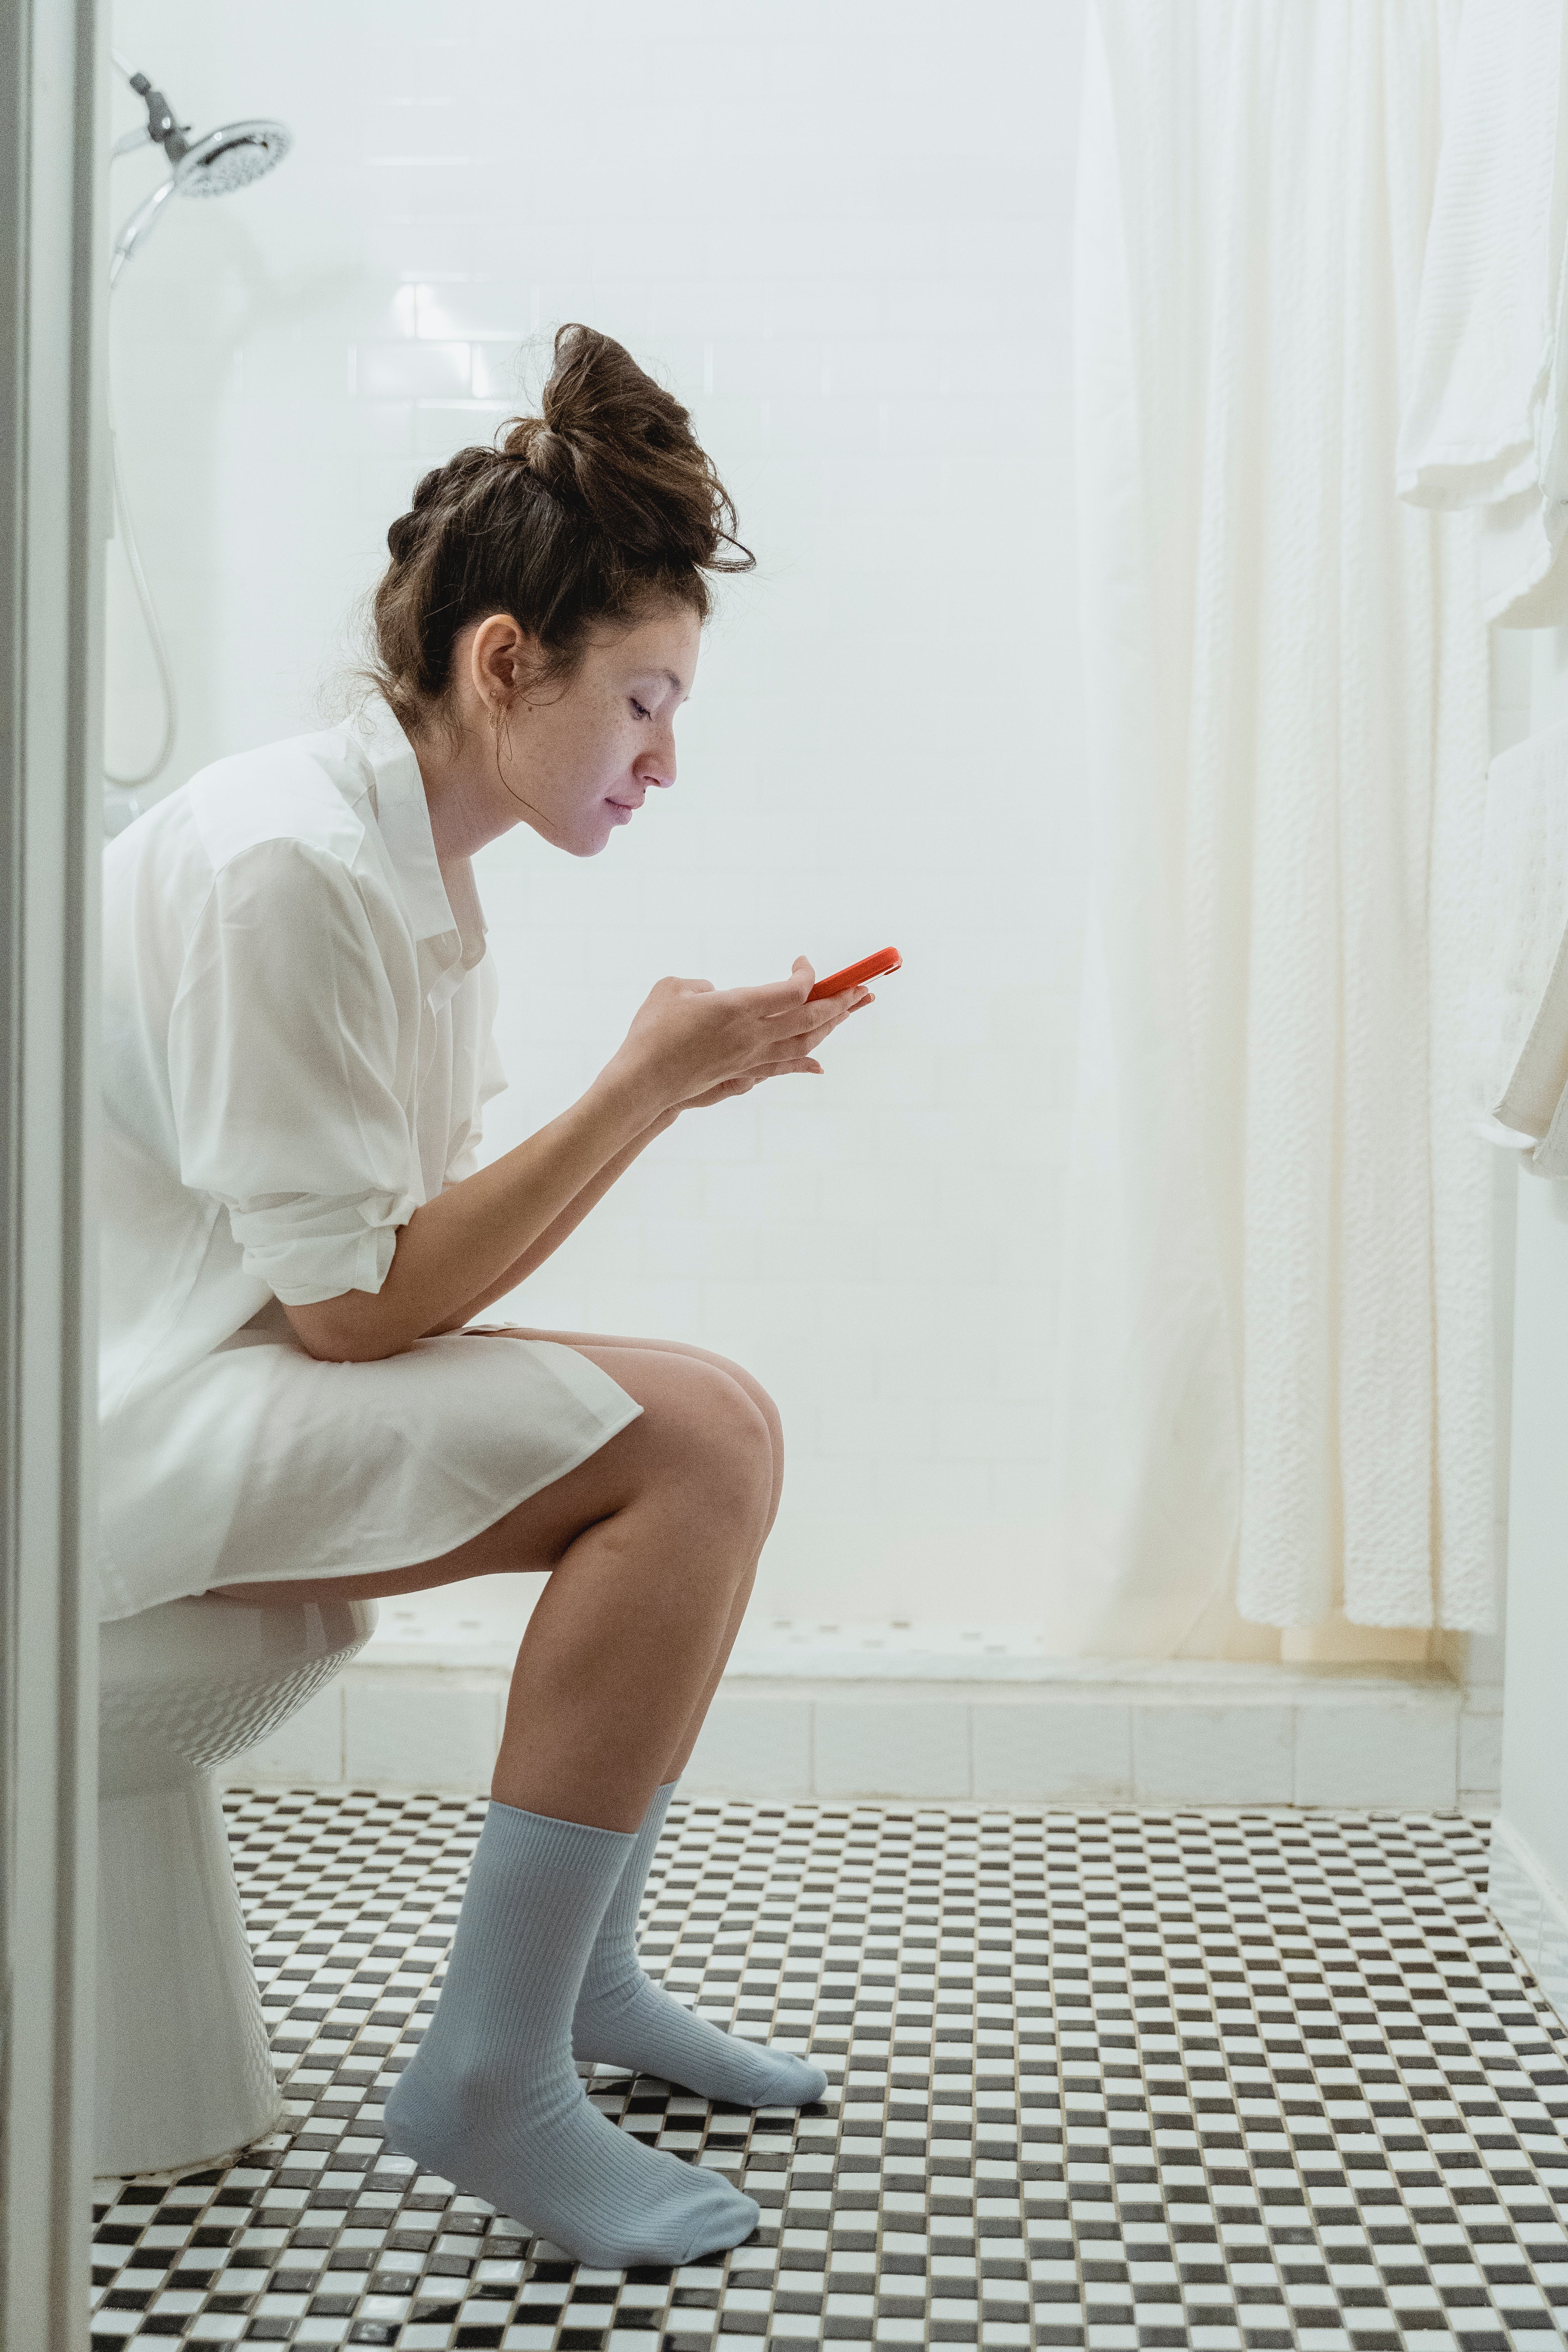 A woman sitting on a toilet using her phone. | Source: Pexels